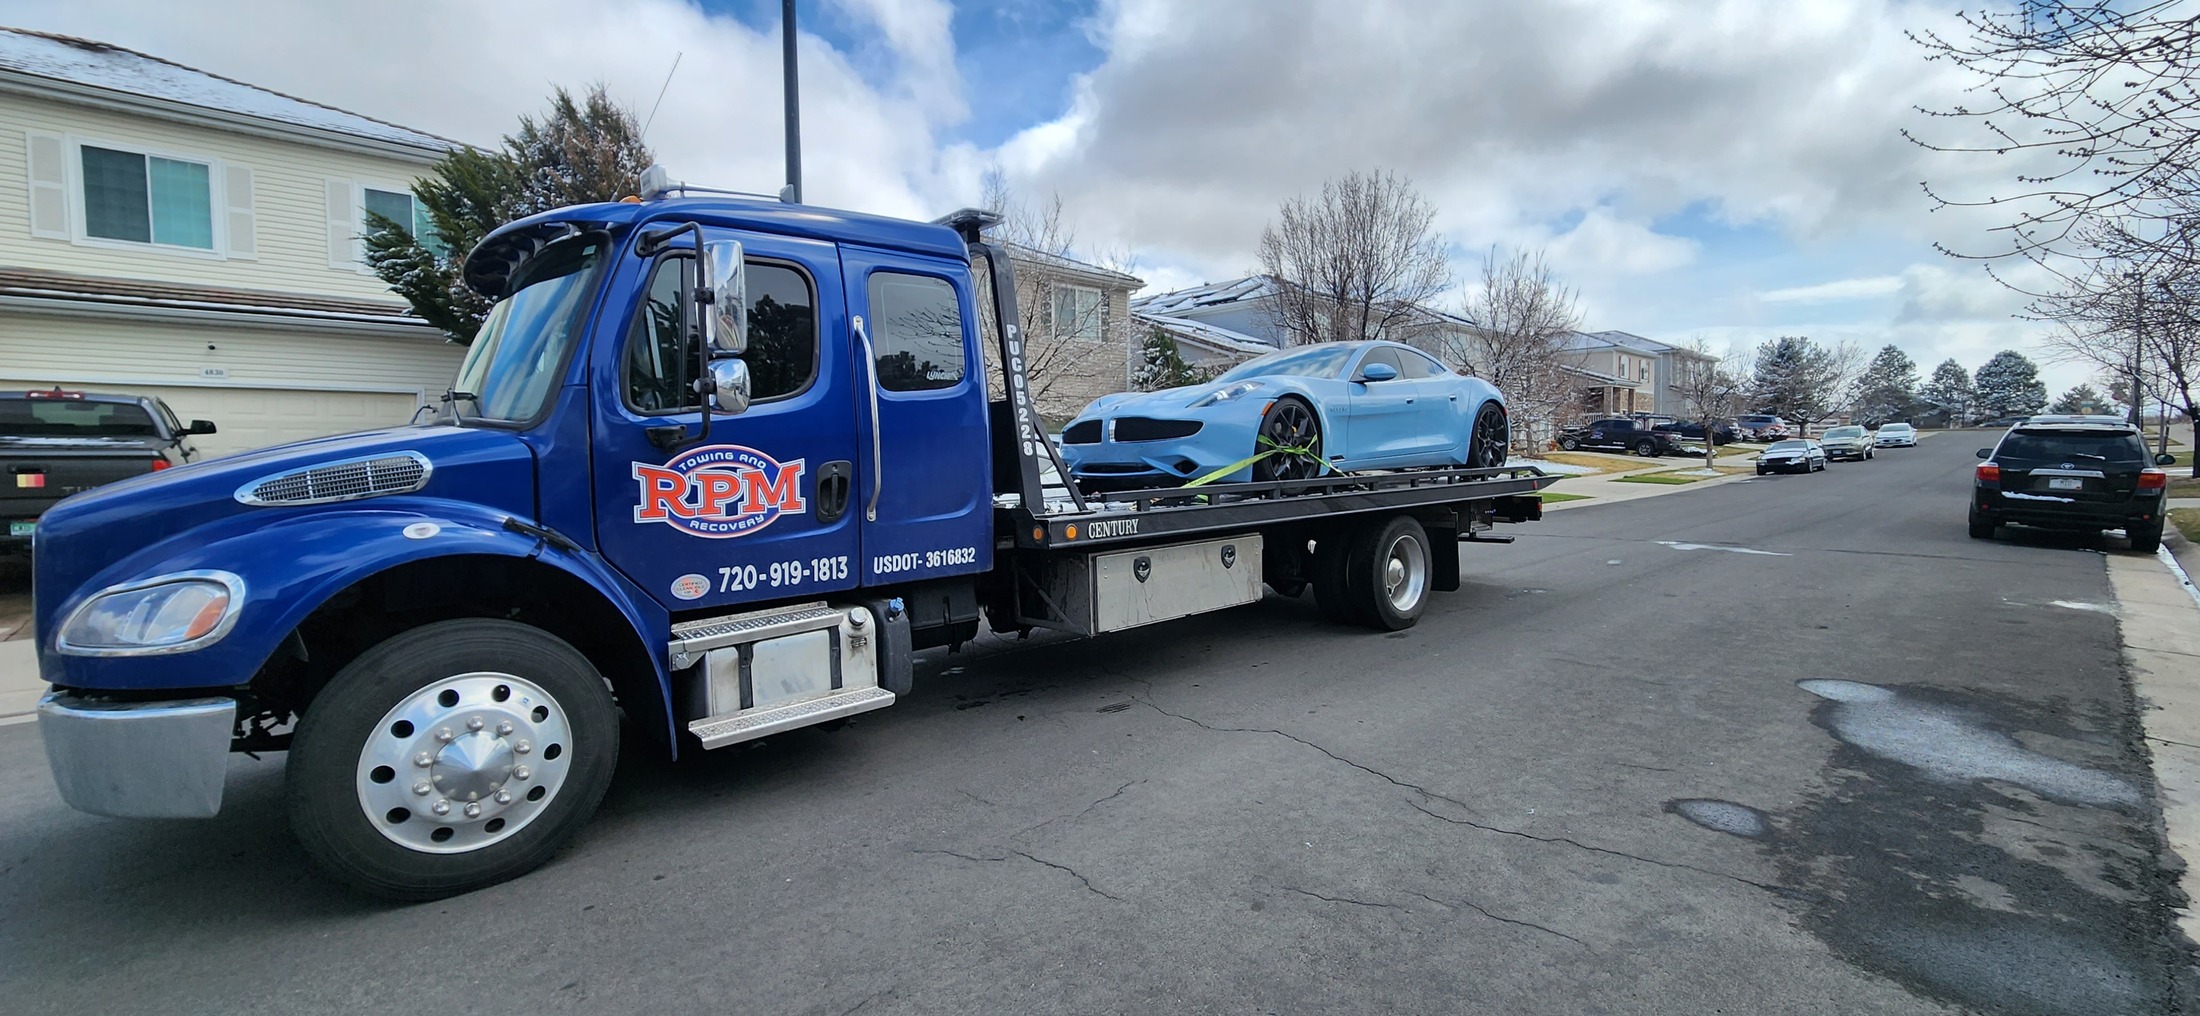 this image shows towing service in Westminster, CO